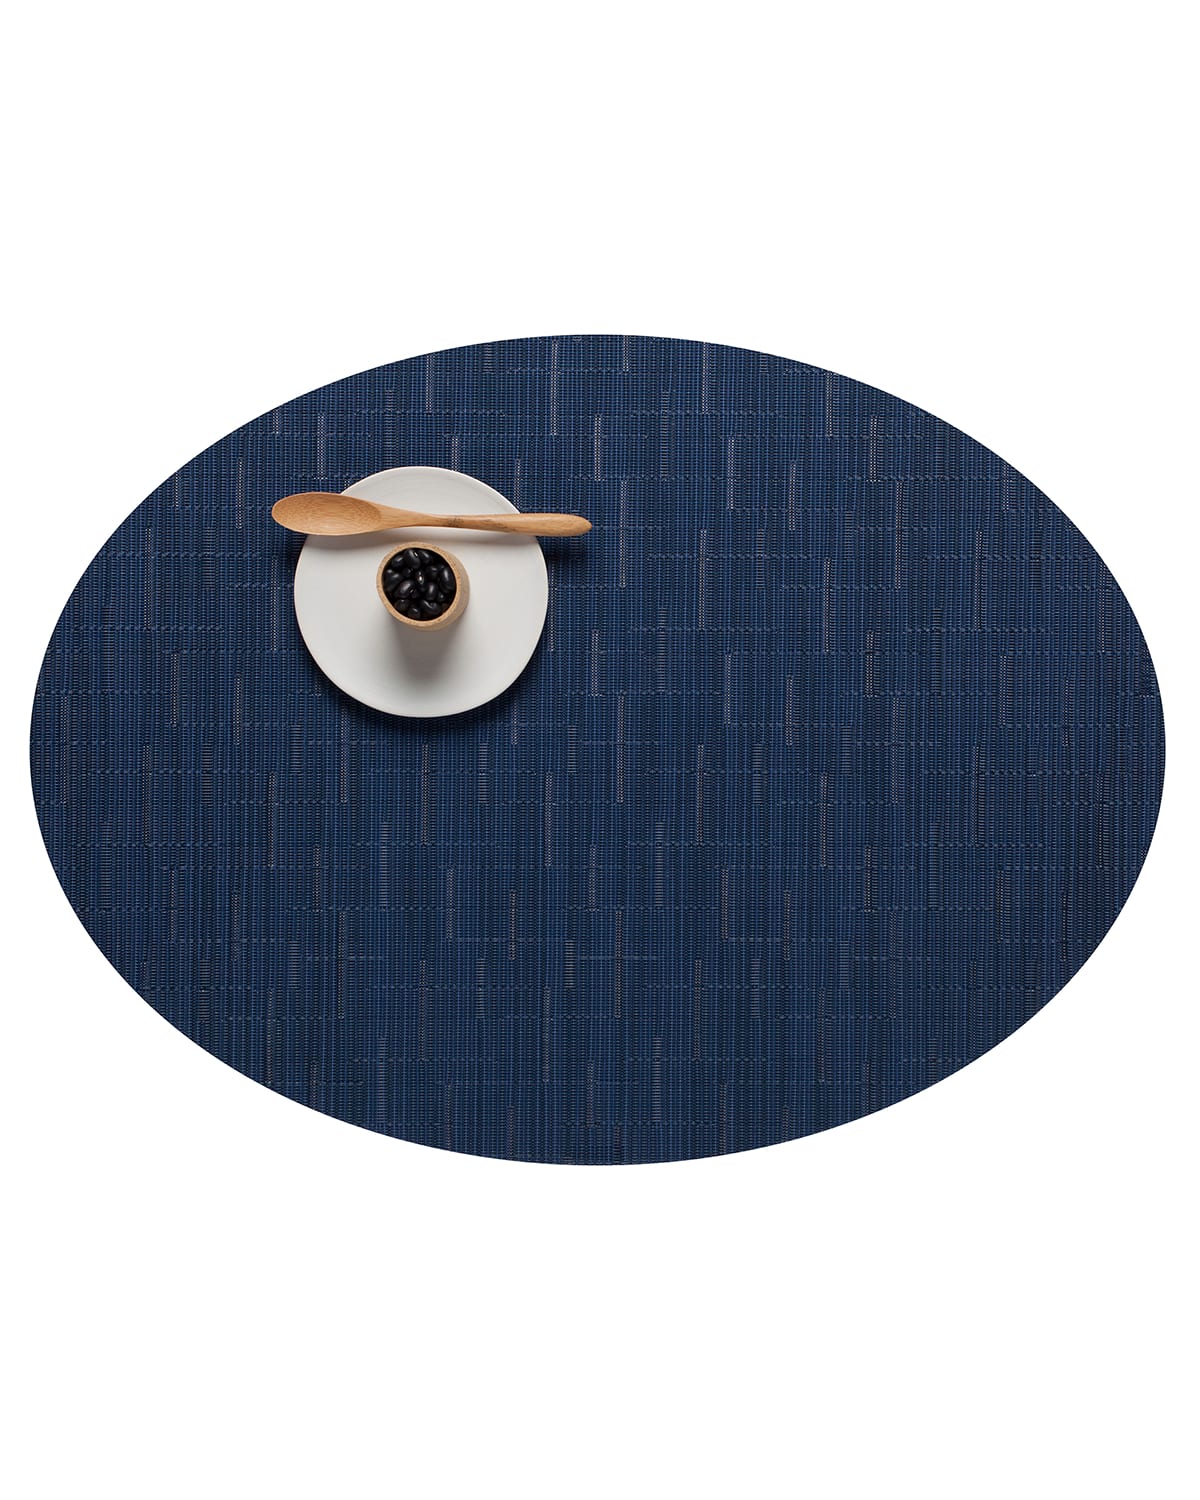 Chilewich Bamboo Oval Placemat In Lapis